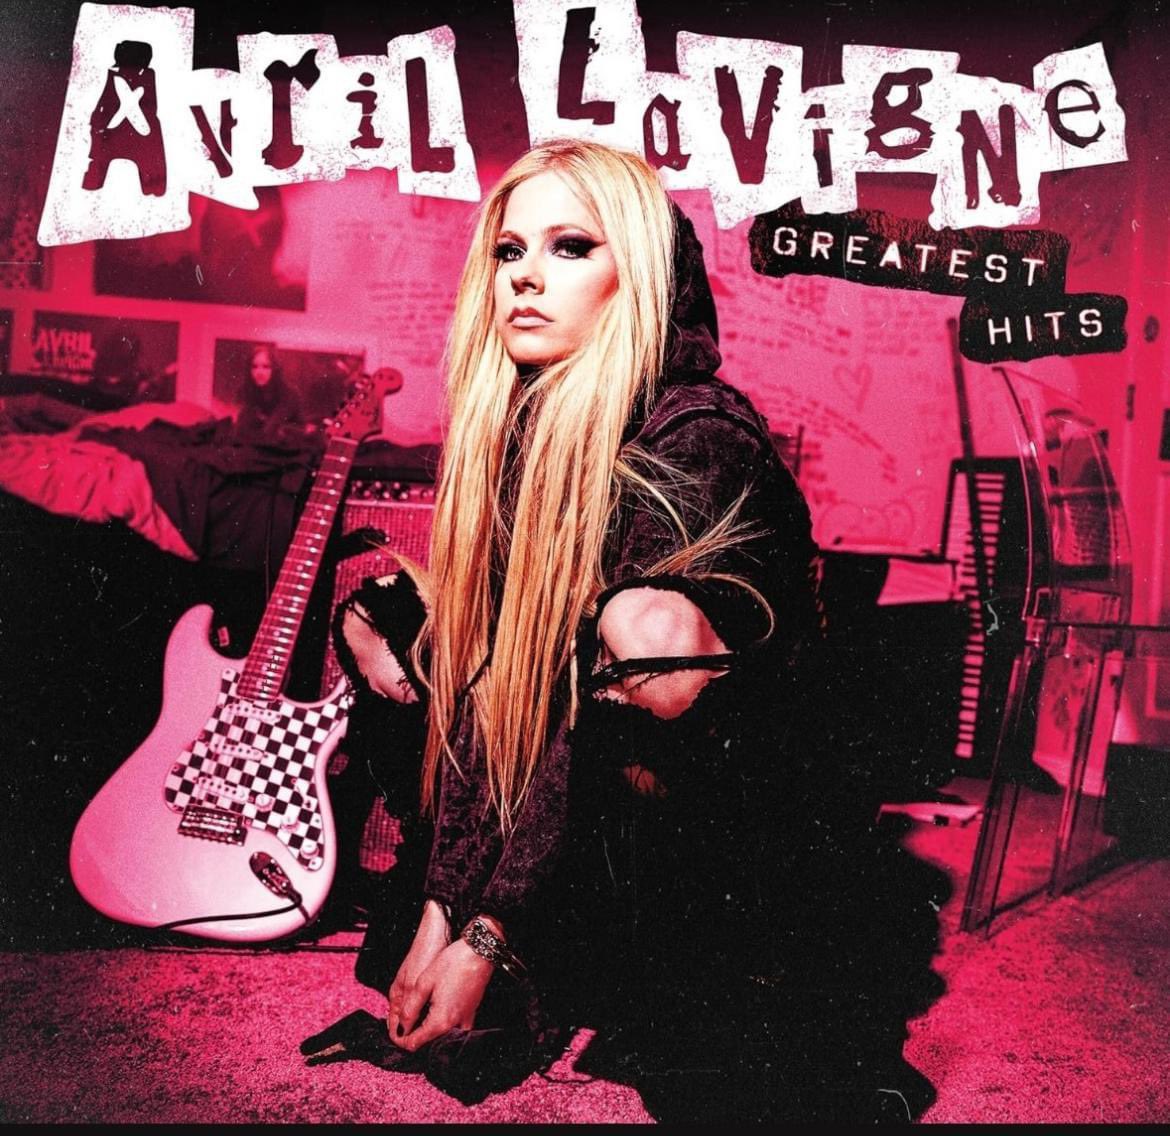 Avril Lavigne Greatest Hits album! ‼️

Soon available for Pre-Order on iTunes and Vinyl form June 21st 🔥🔥

#avrillavigne #greatesthits #lovesux #avril #hits #tour #greatesthitstour